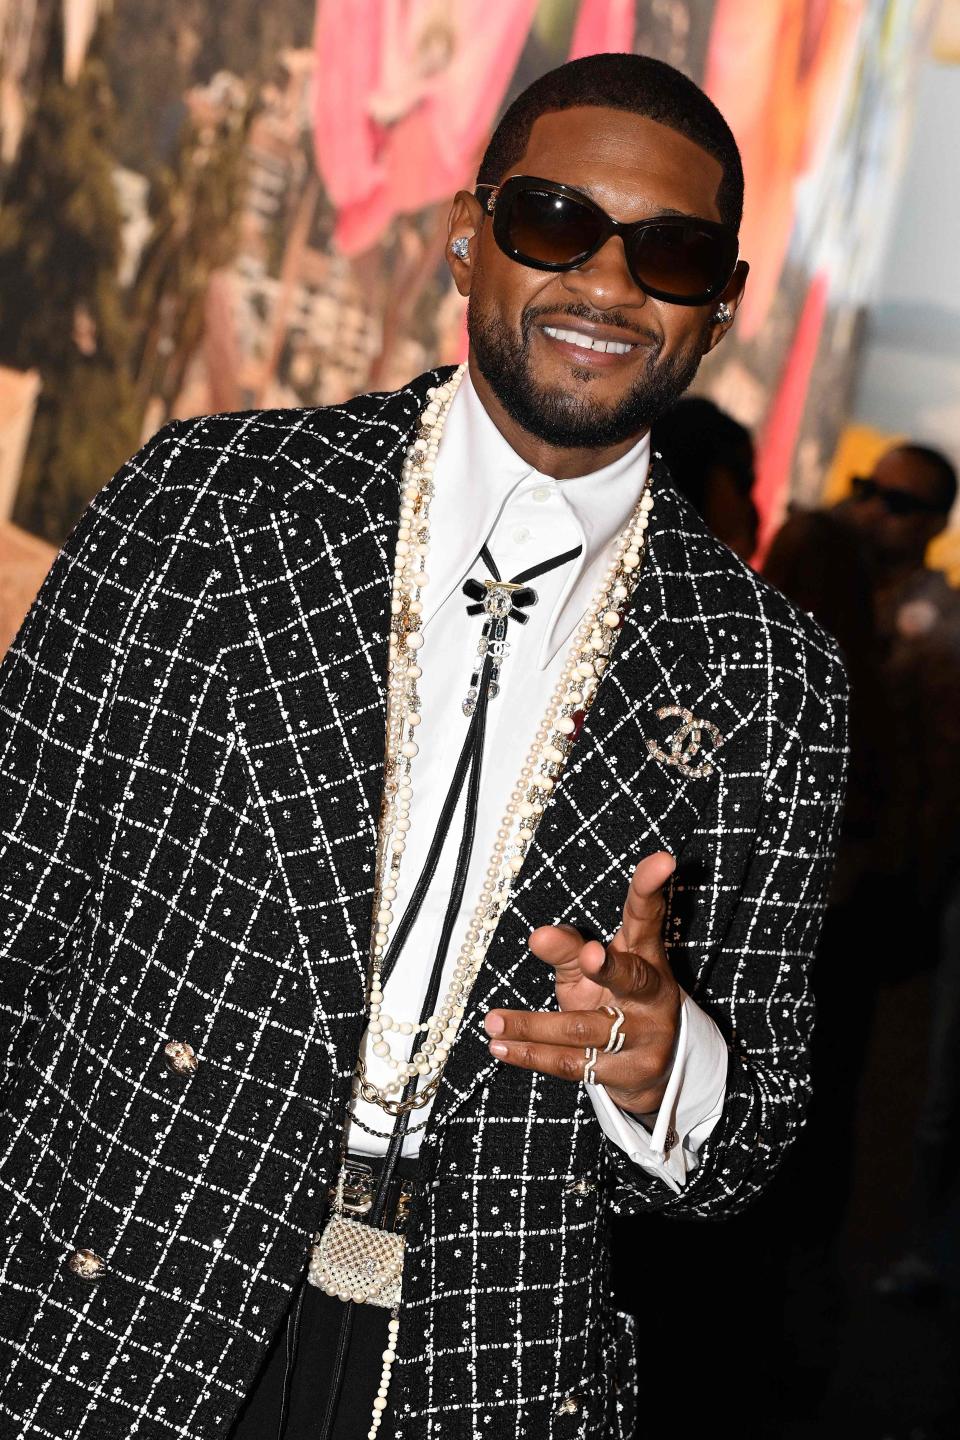 Usher gestures before the Chanel show during Paris Fashion Week at the Grand Palais Ephemere in Paris on Oct. 3, 2023.